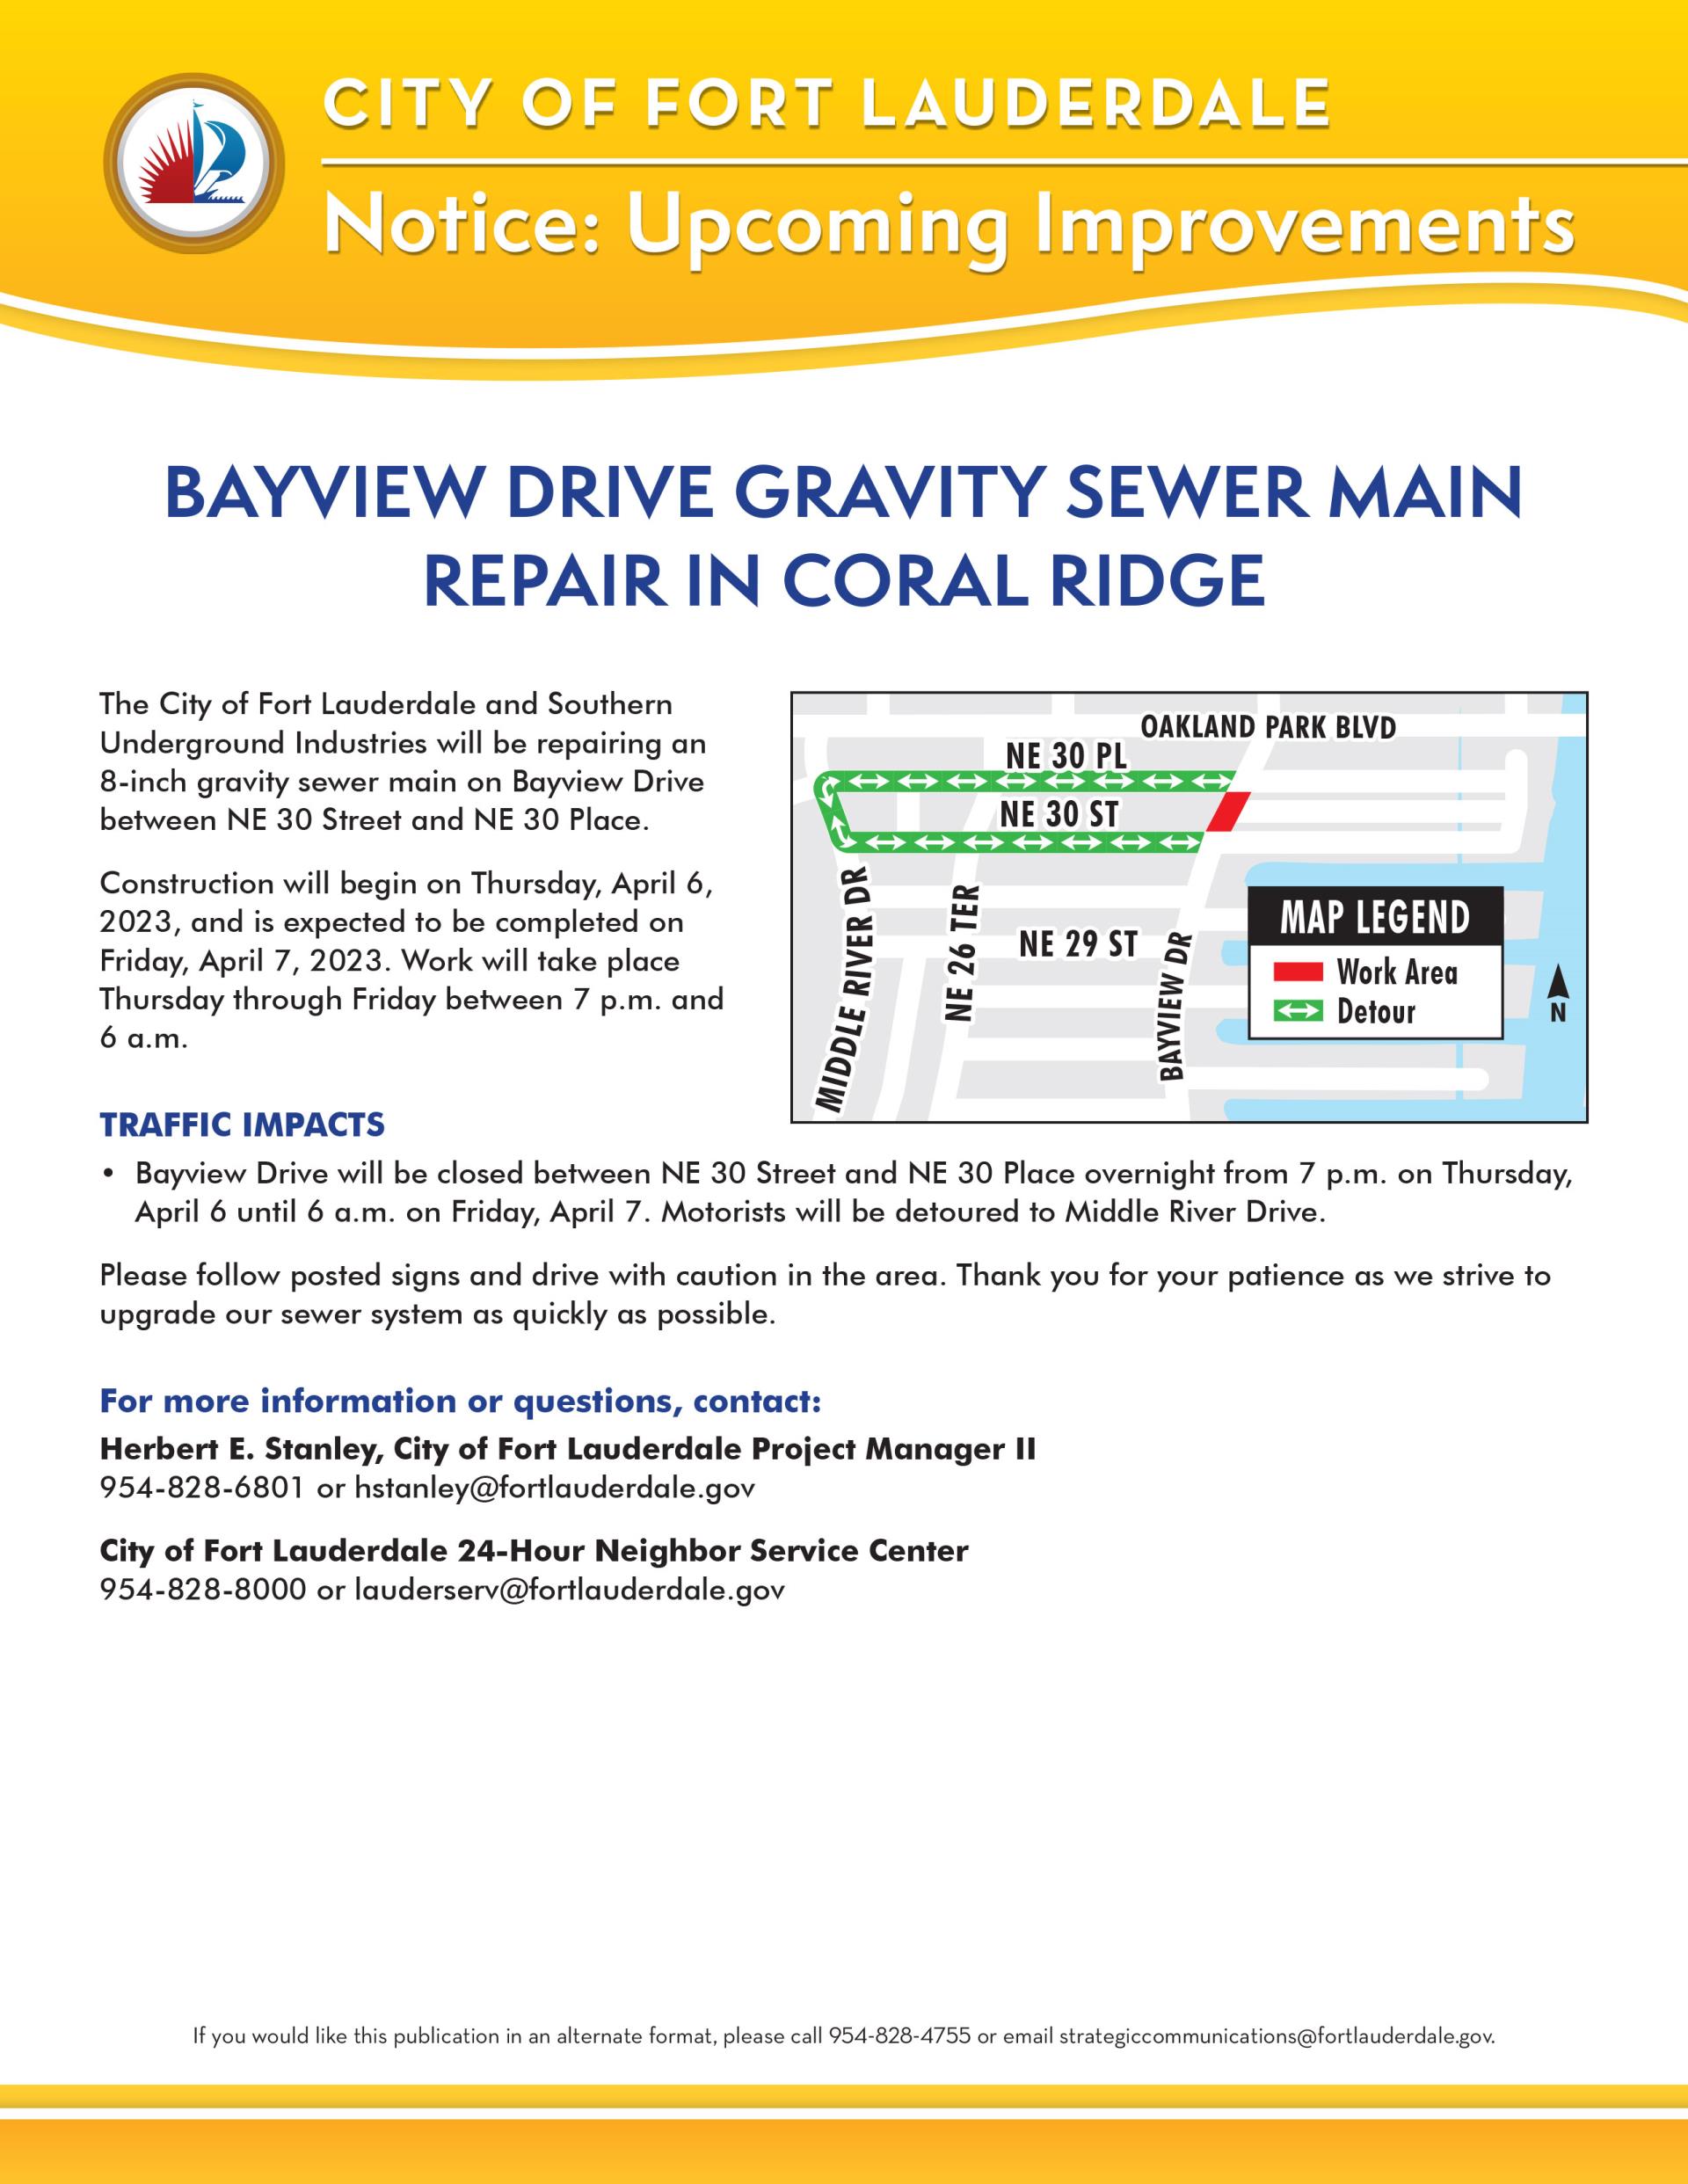 8097-PW-Bayview-Dr-Sewer-Main-Repair-Cnstrctn-Flyer_03312023